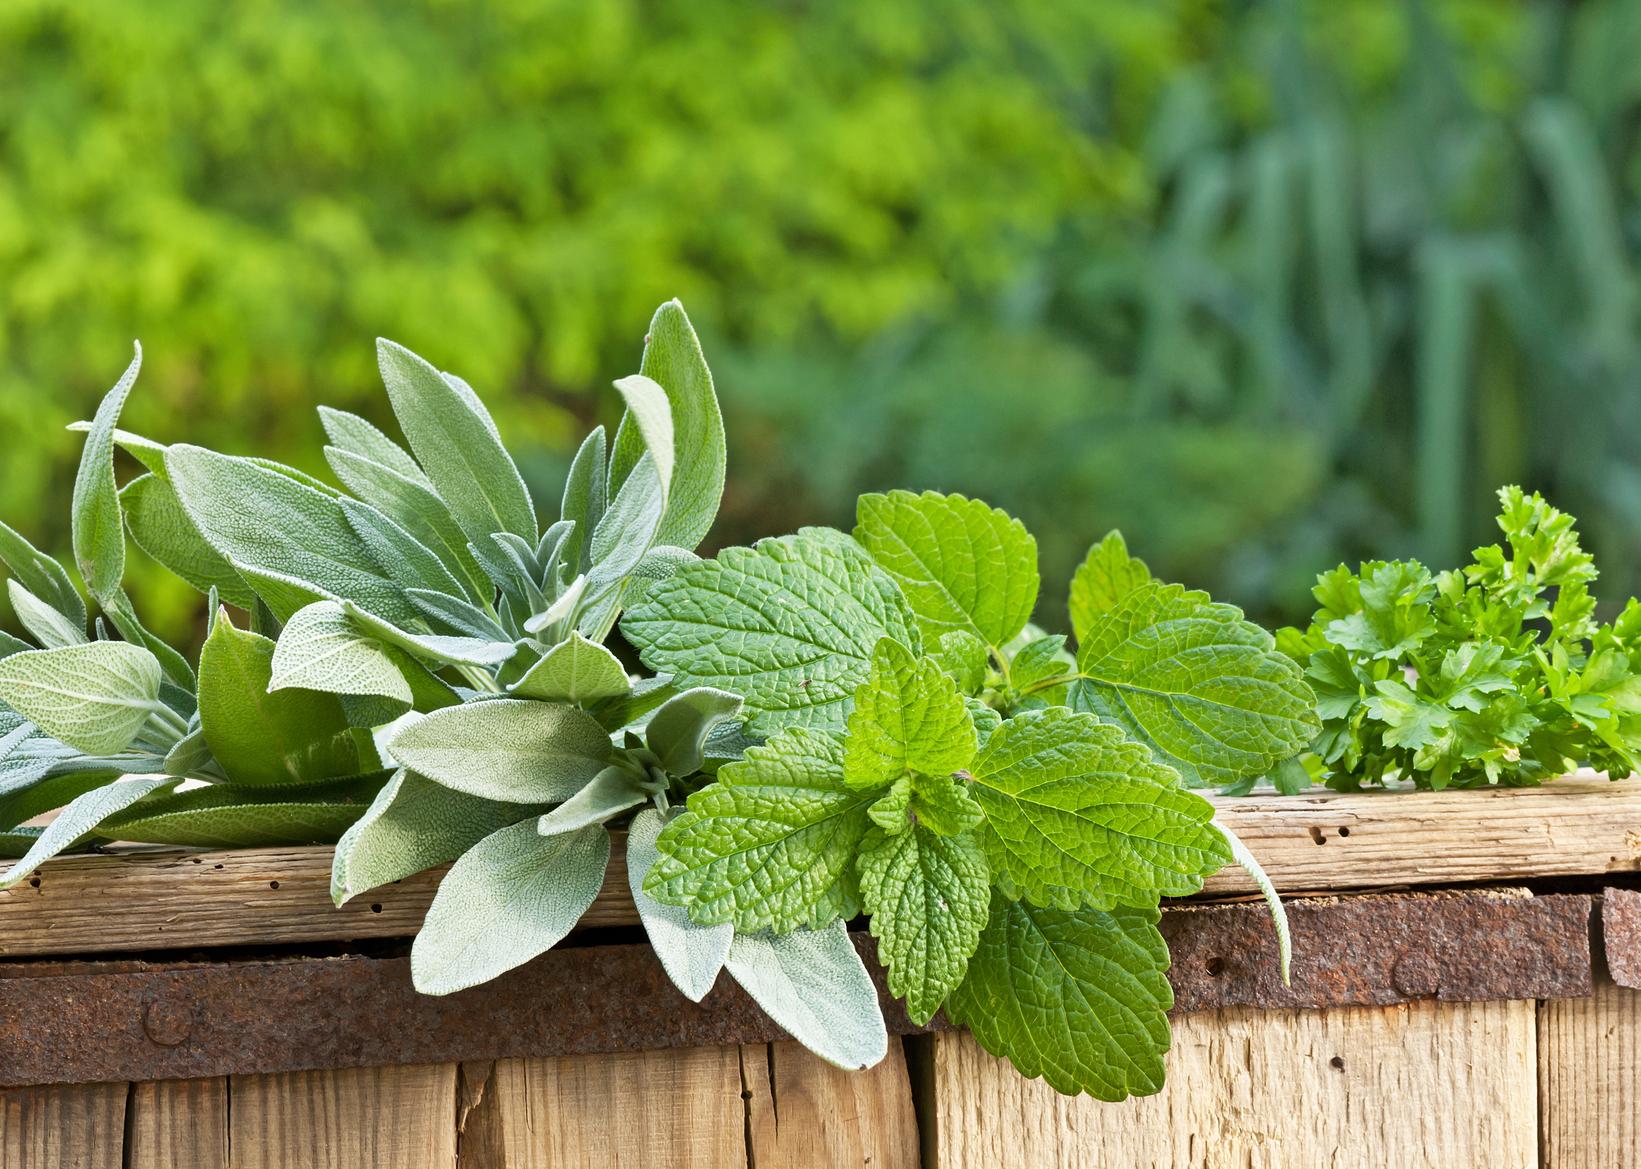 Care for Herb Plants - How to Care For Yours
